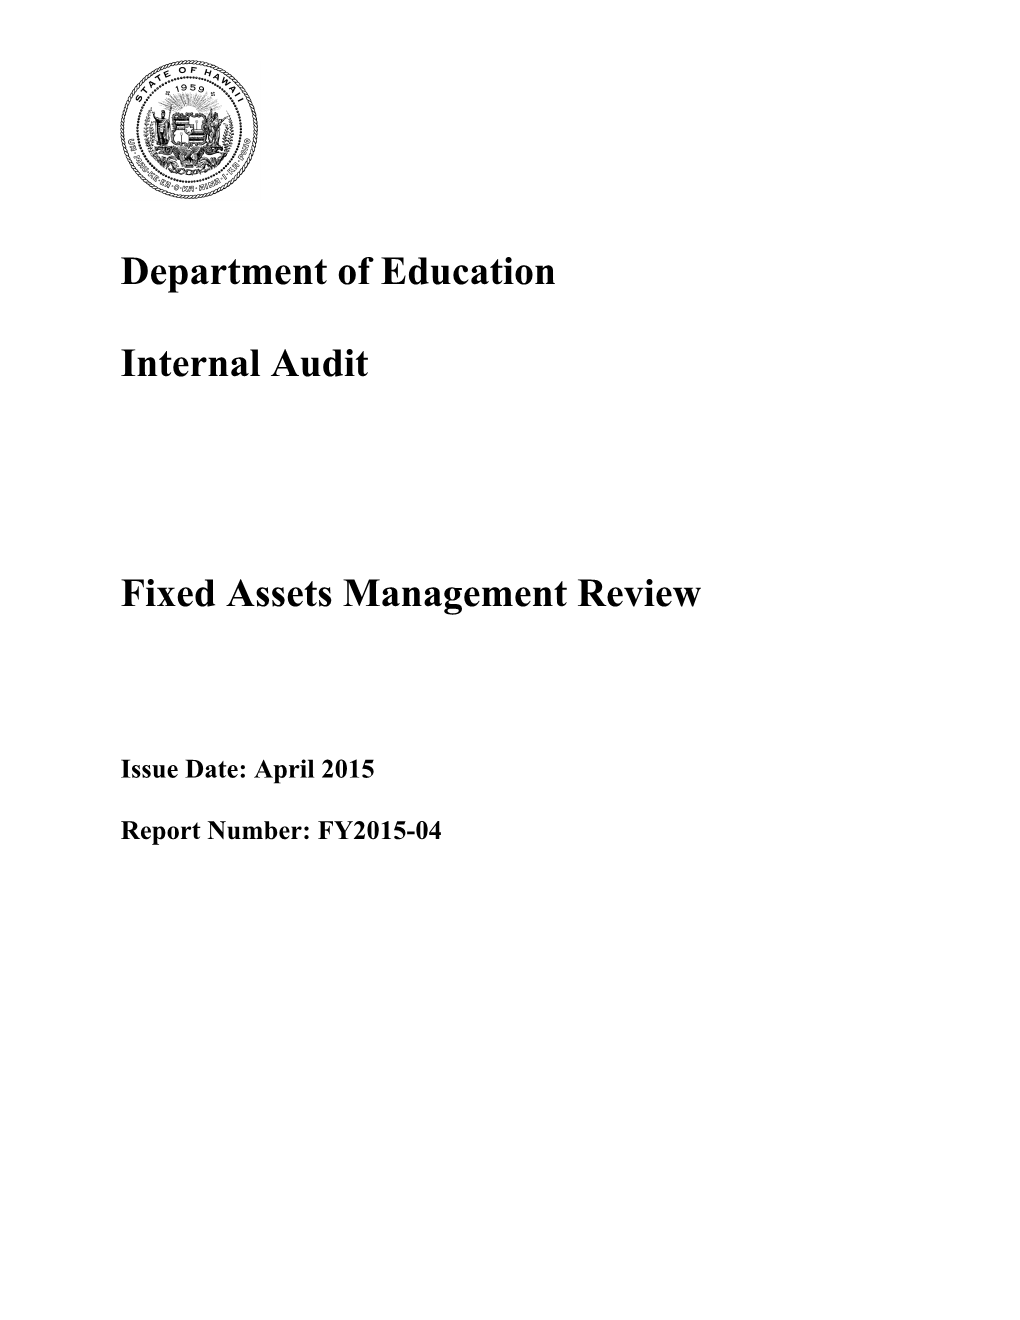 Department of Education Internal Audit Fixed Assets Management